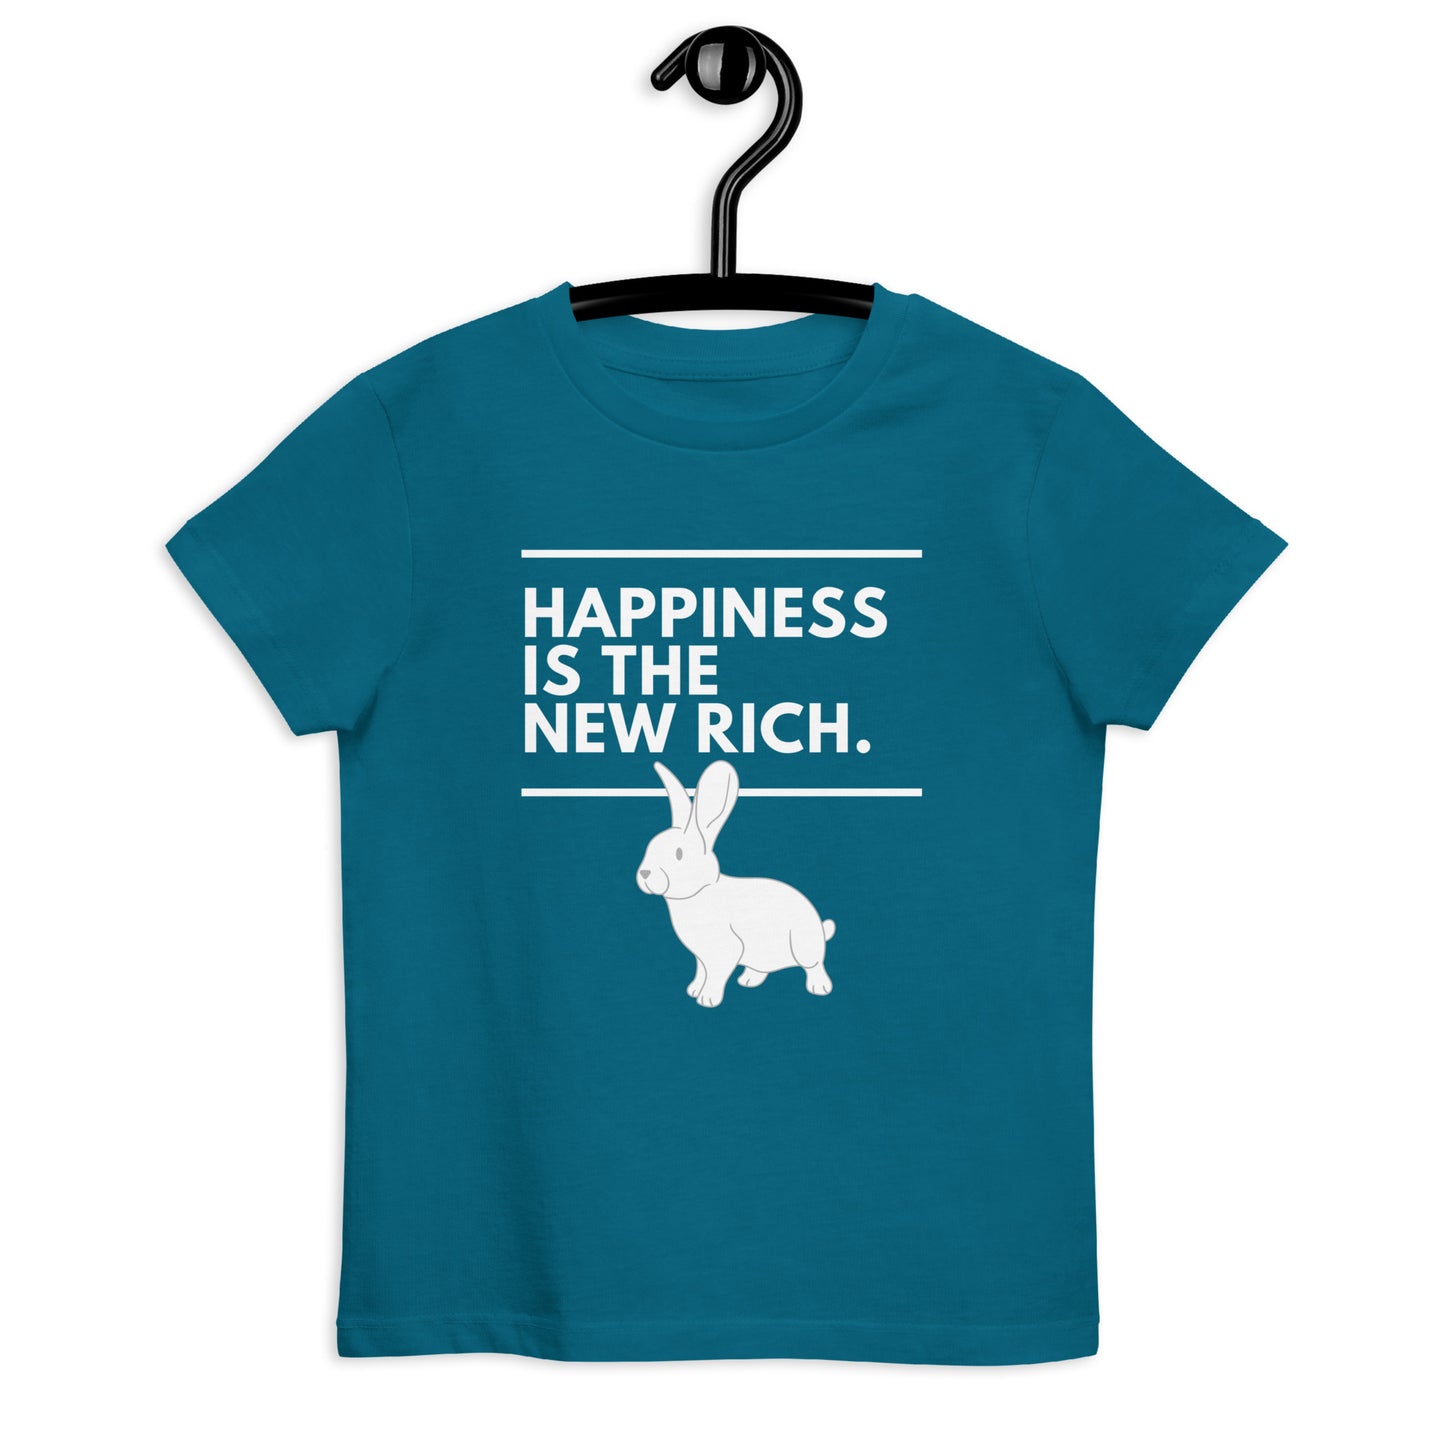 Happiness Is The New Rich Organic Cotton Kids T-shirt